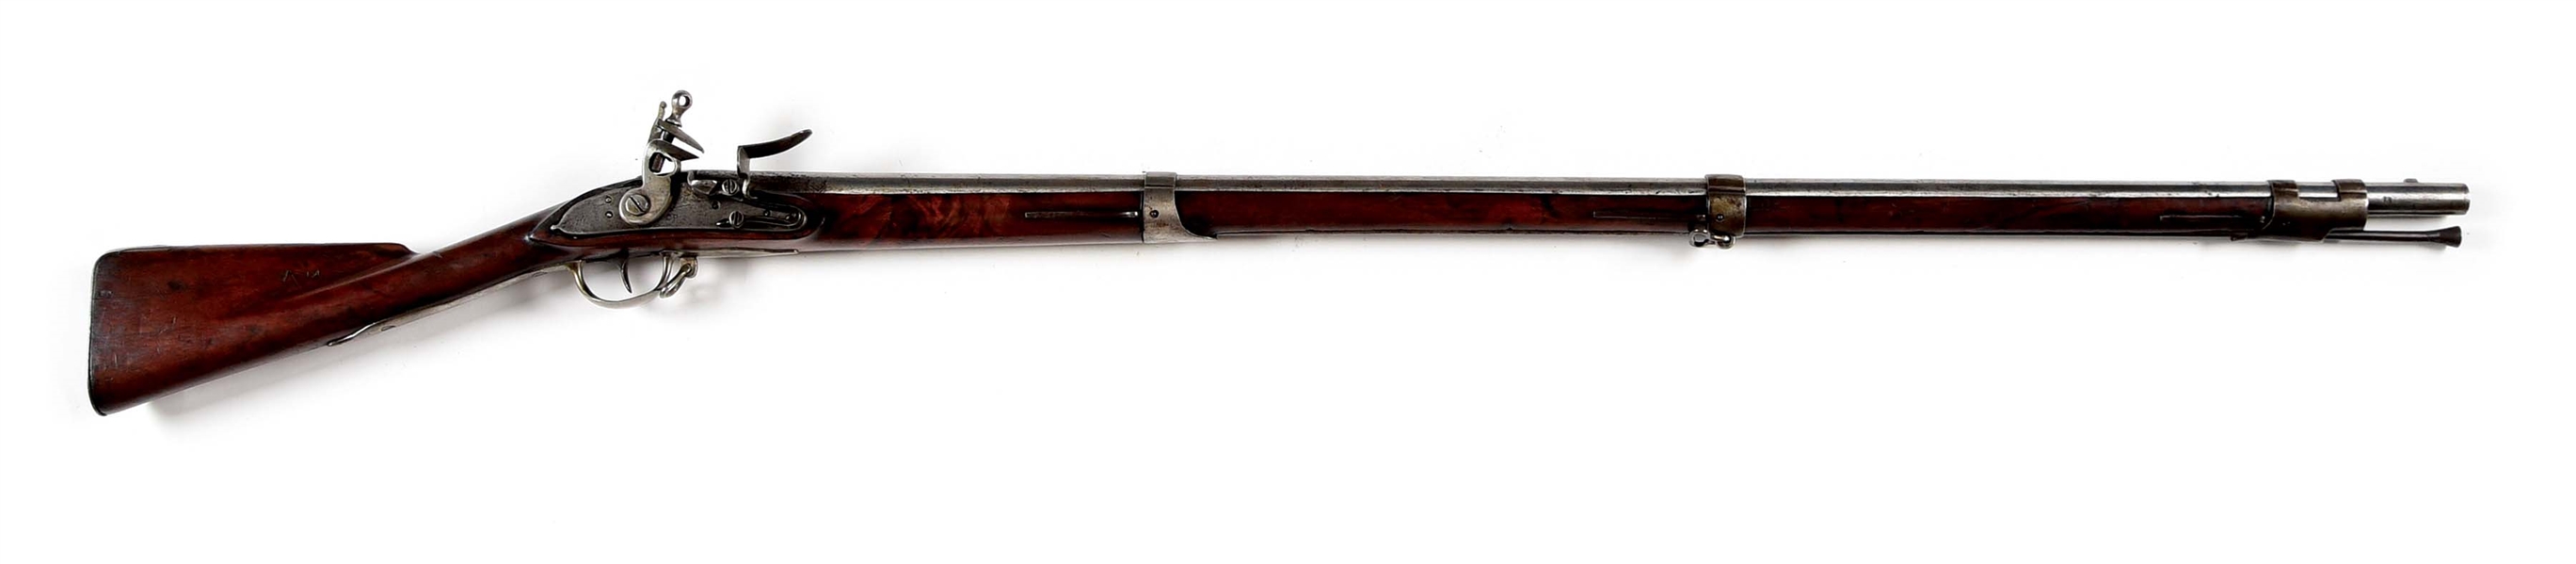 (A) 1797 HENRY "COMMONWEALTH OF PENNSYLVANIA RIFLE.